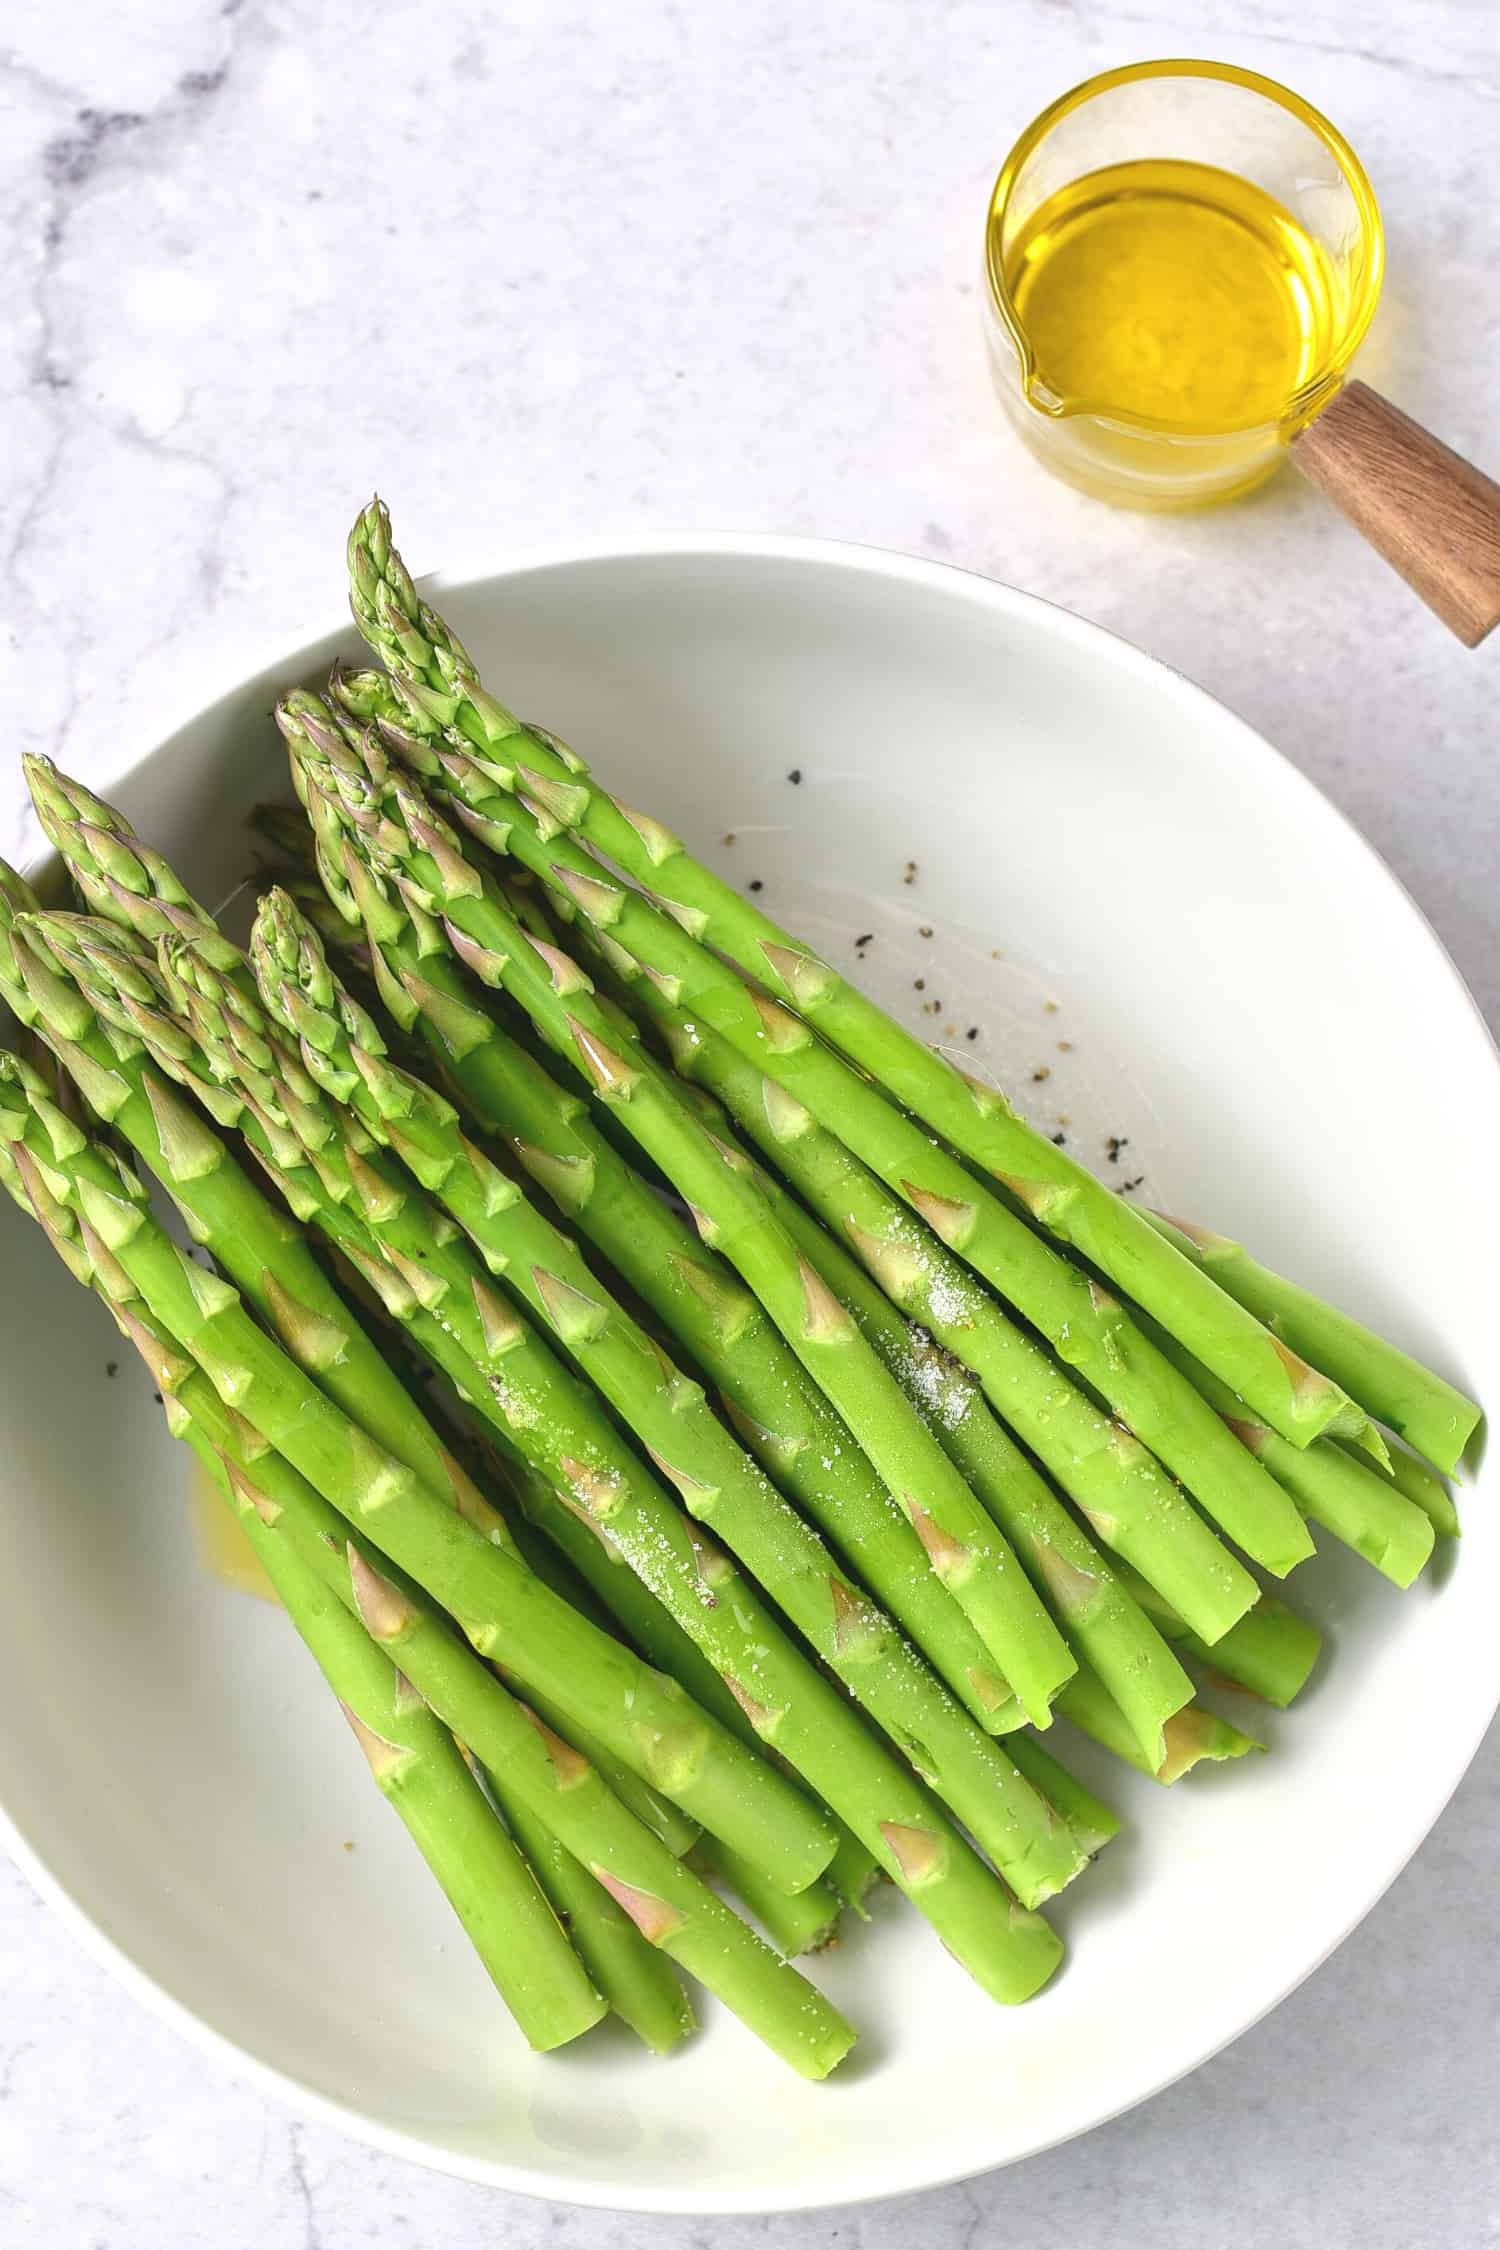 A bowl of asparagus stalks and olive oil.